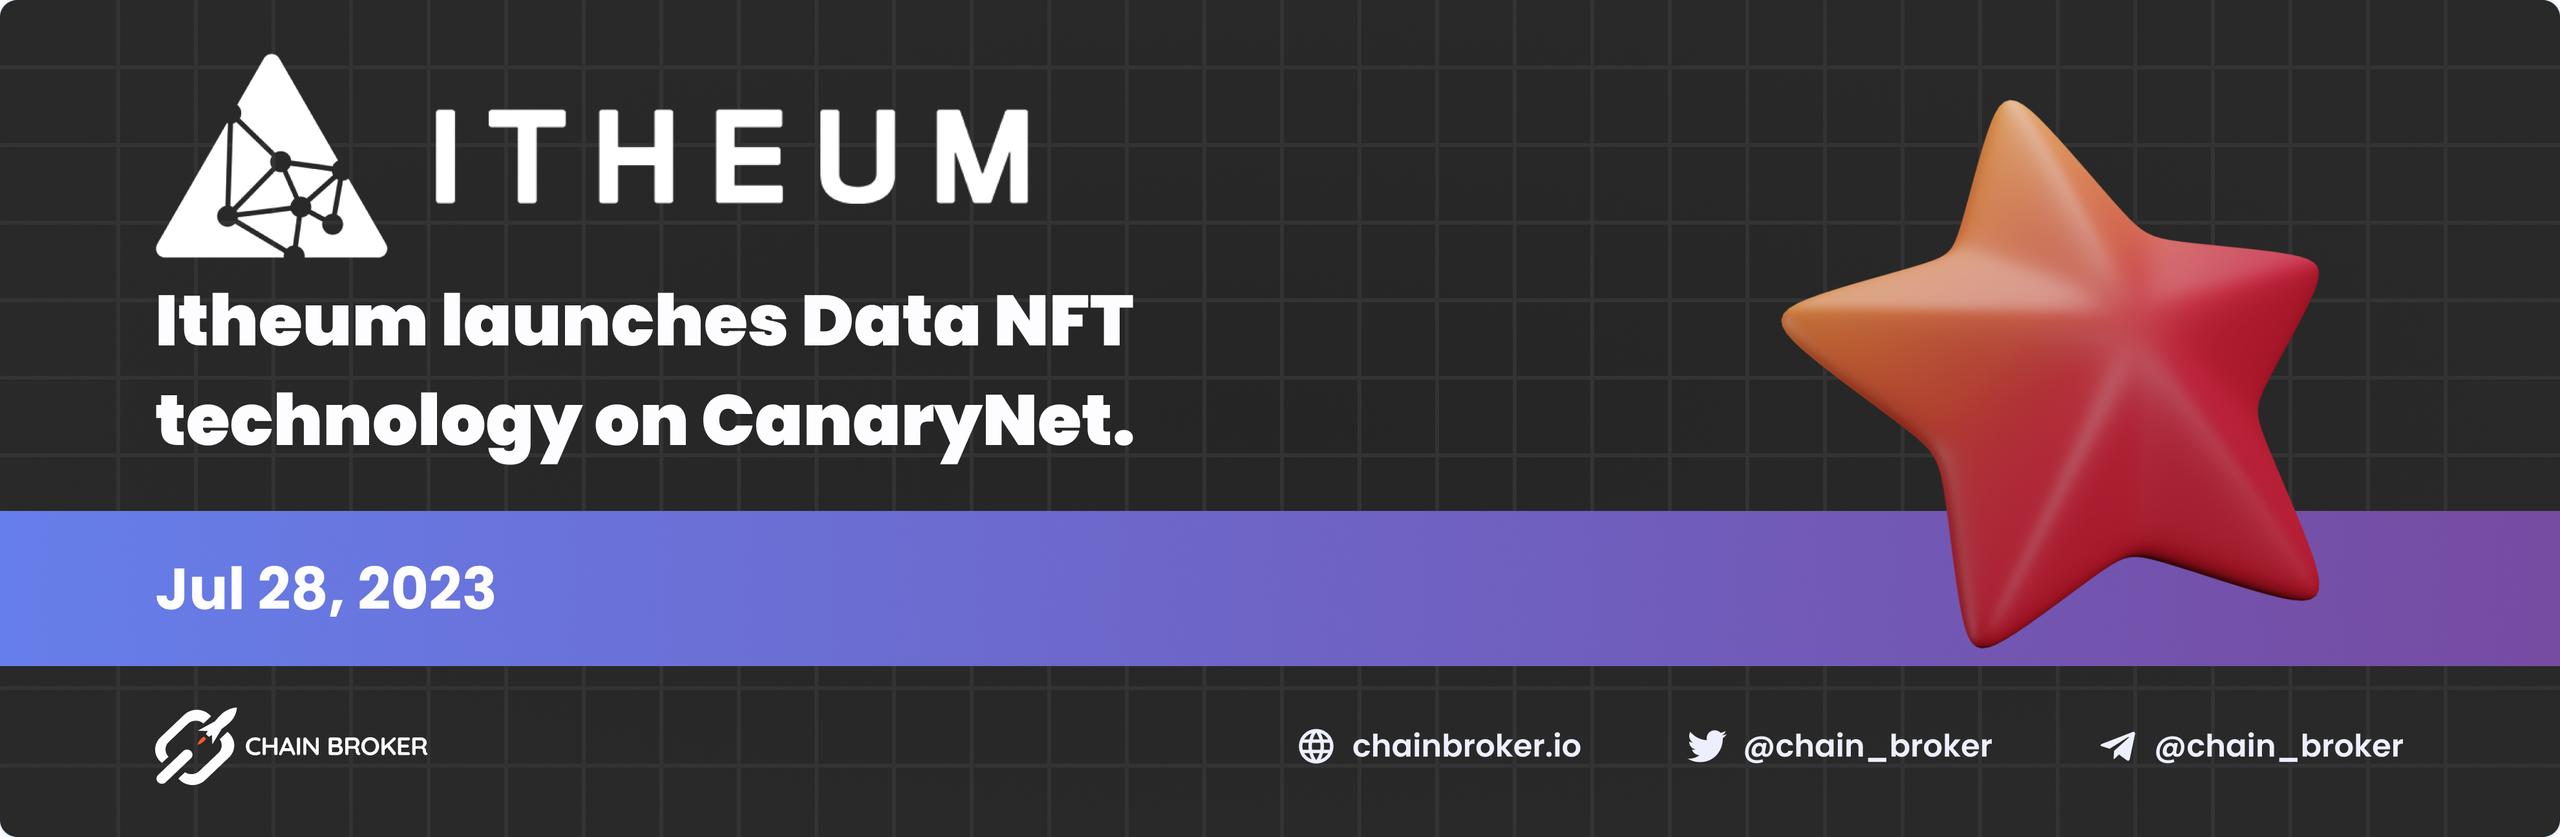 Itheum launches Data NFT technology on CanaryNet.